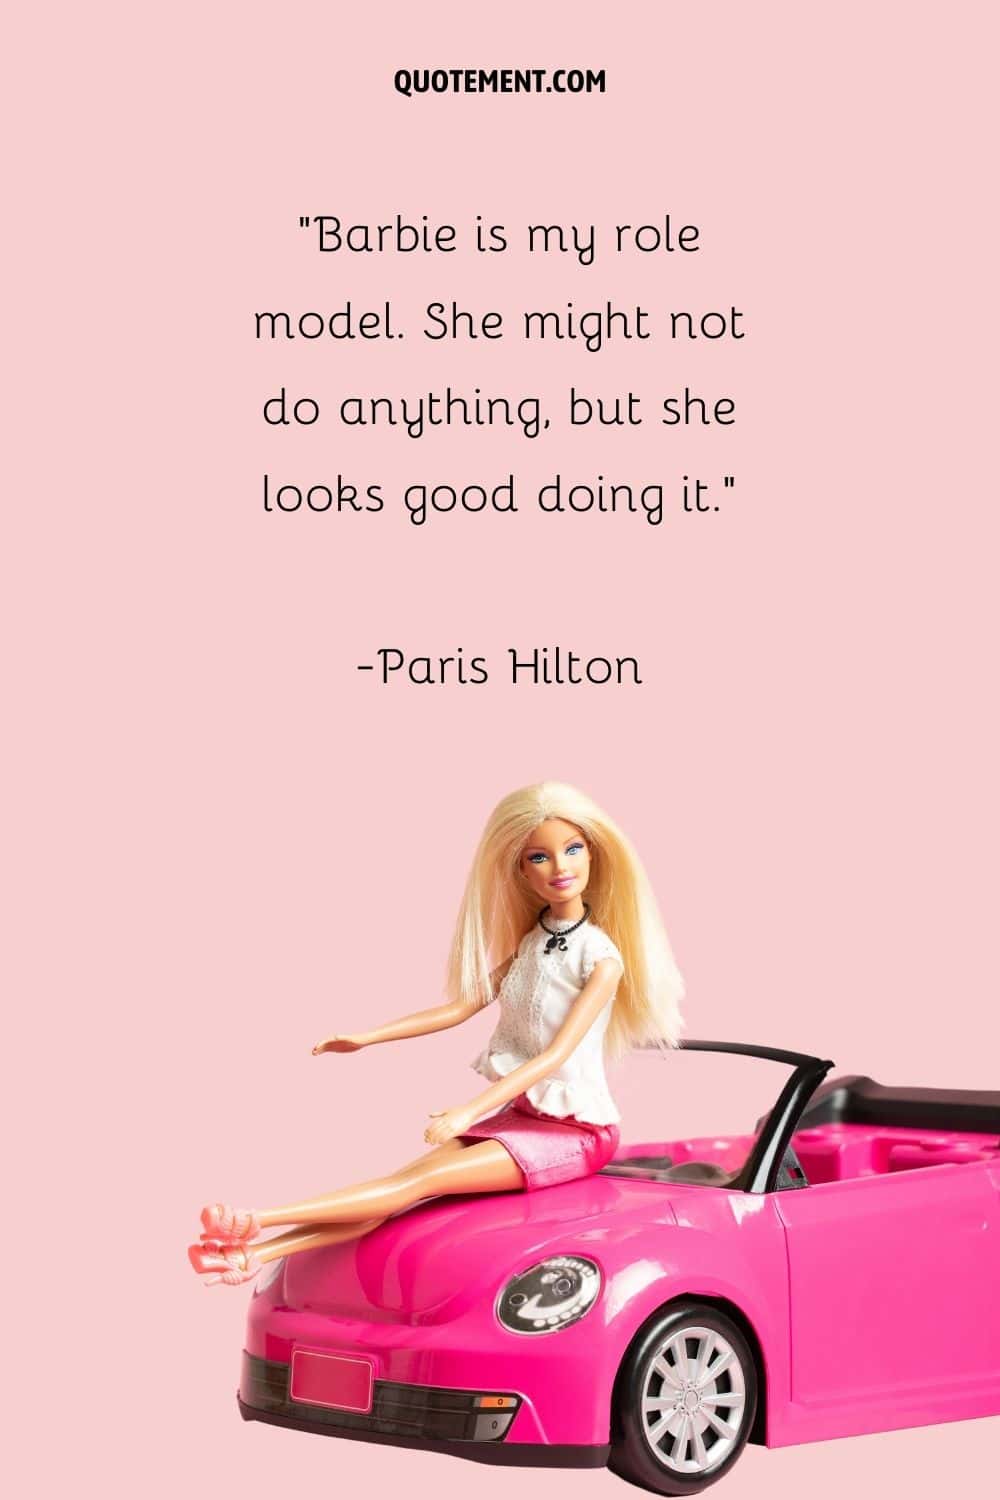 Barbie is my role model. She might not do anything, but she looks good doing it.